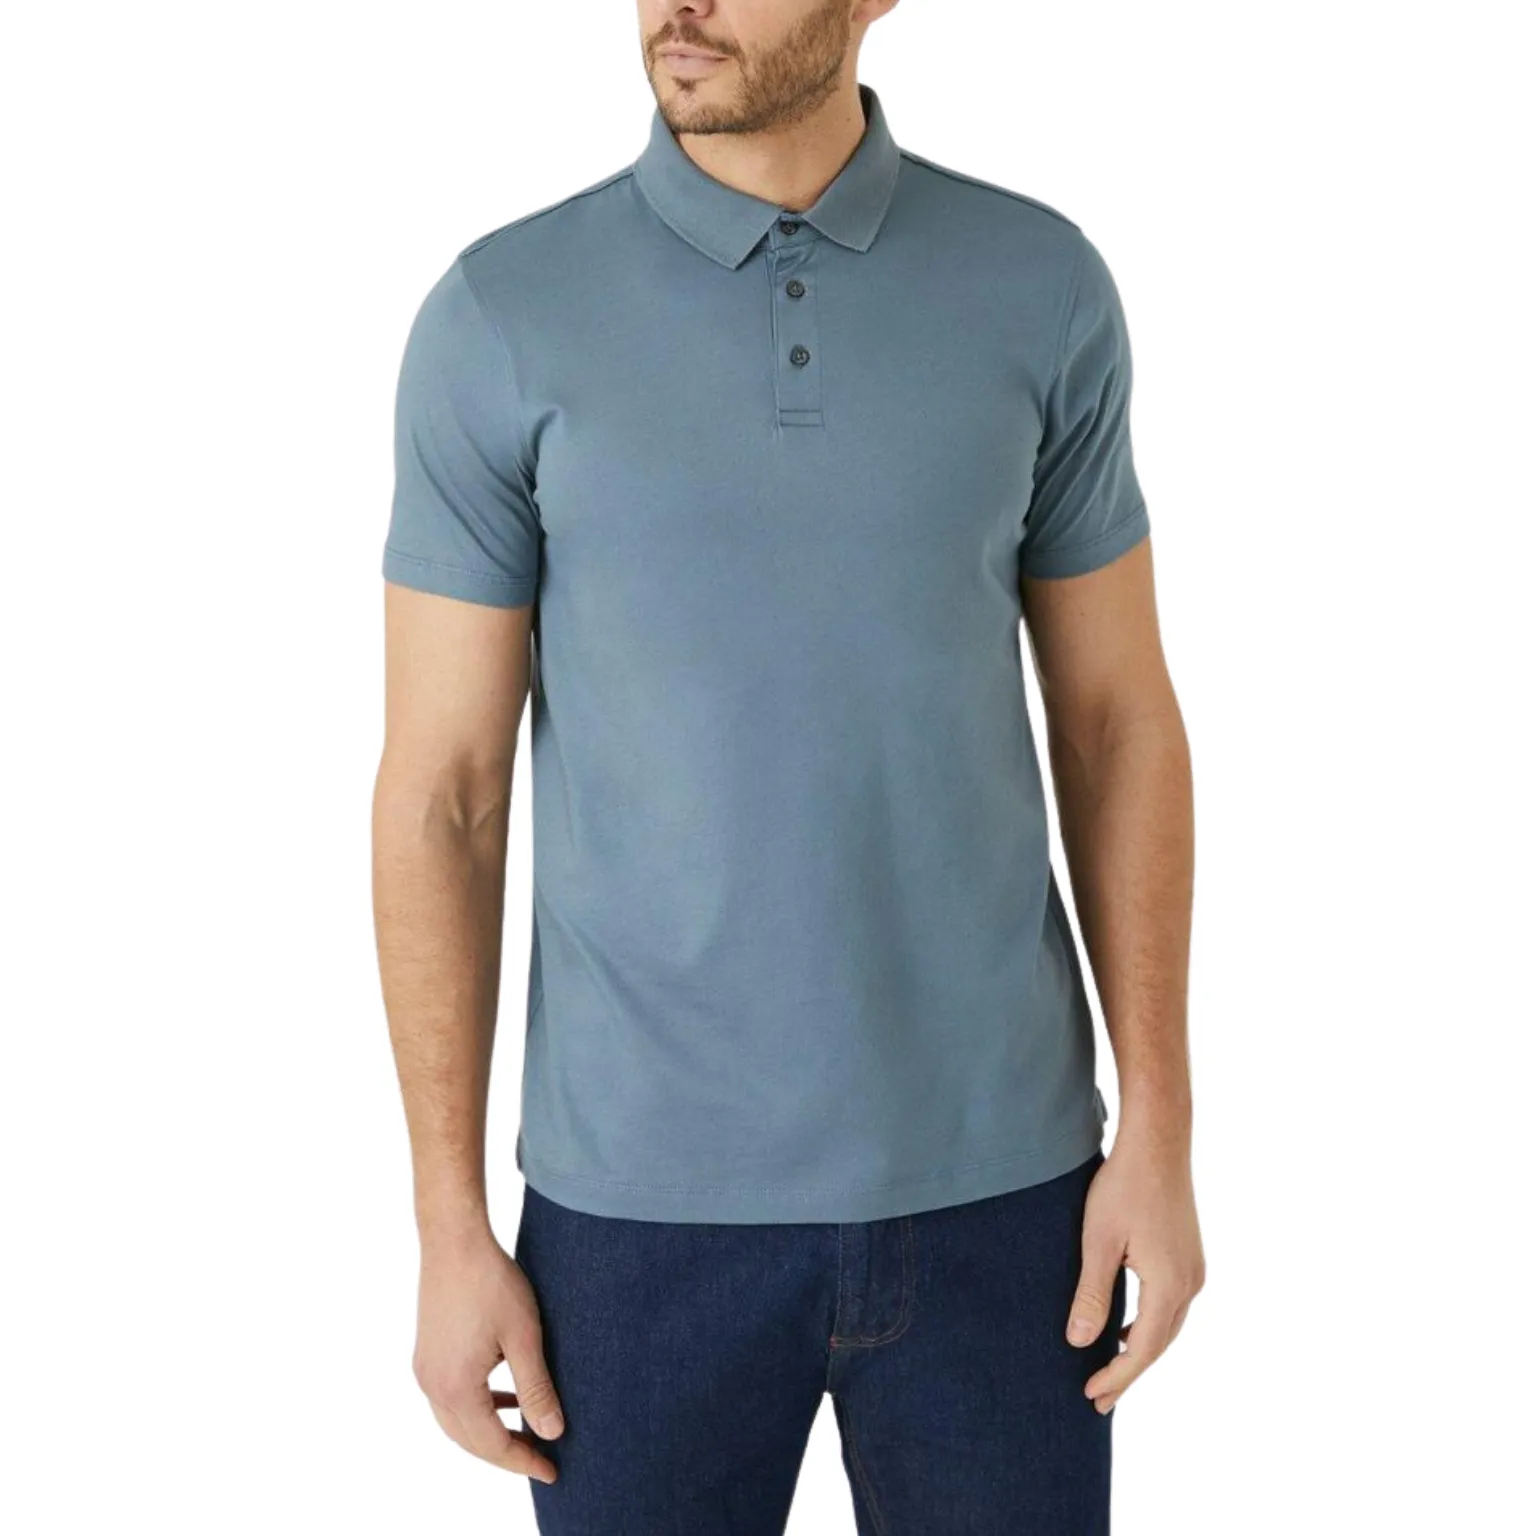 Basic polo shirts manufacturing with trendy design